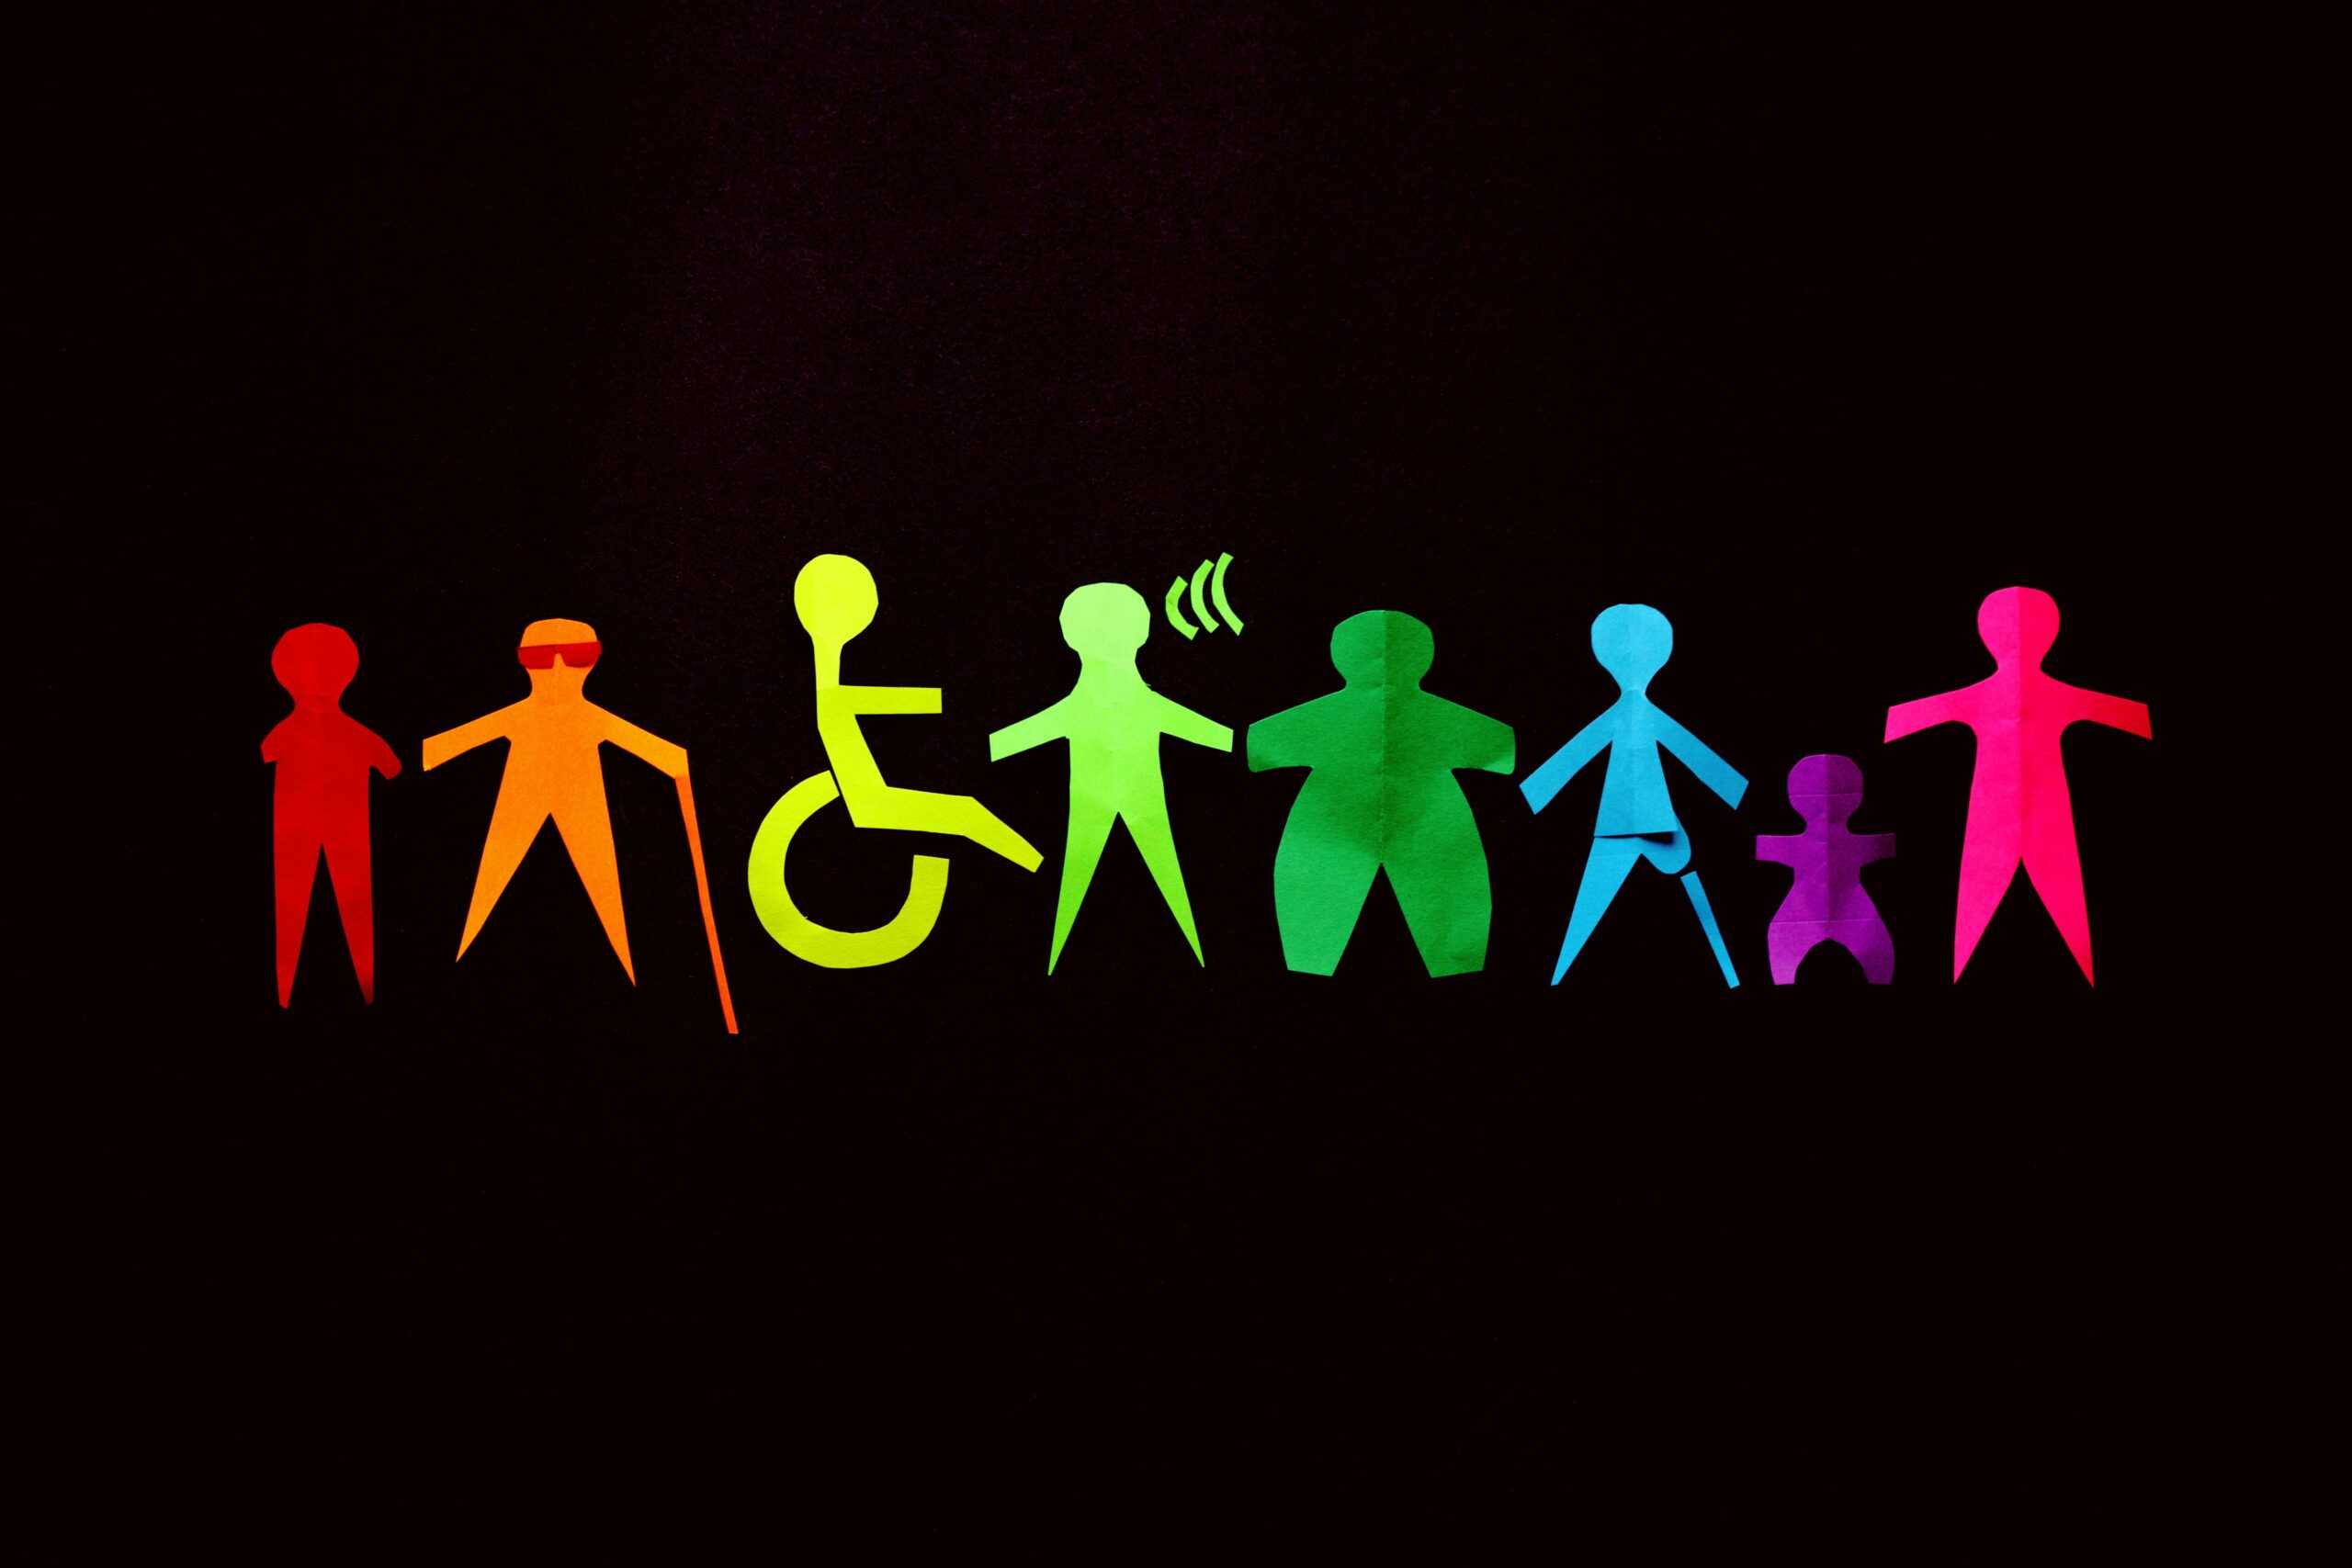 A group of rainbow colored stick figures with various disabilities are situated in a line. The stick figures show a blind person with a white cane, a person using a wheelchair, a person with dwarfism, people with limb differences and a Deaf person, all with varying body types. Each disability is valid and worthy of accessible accommodations.